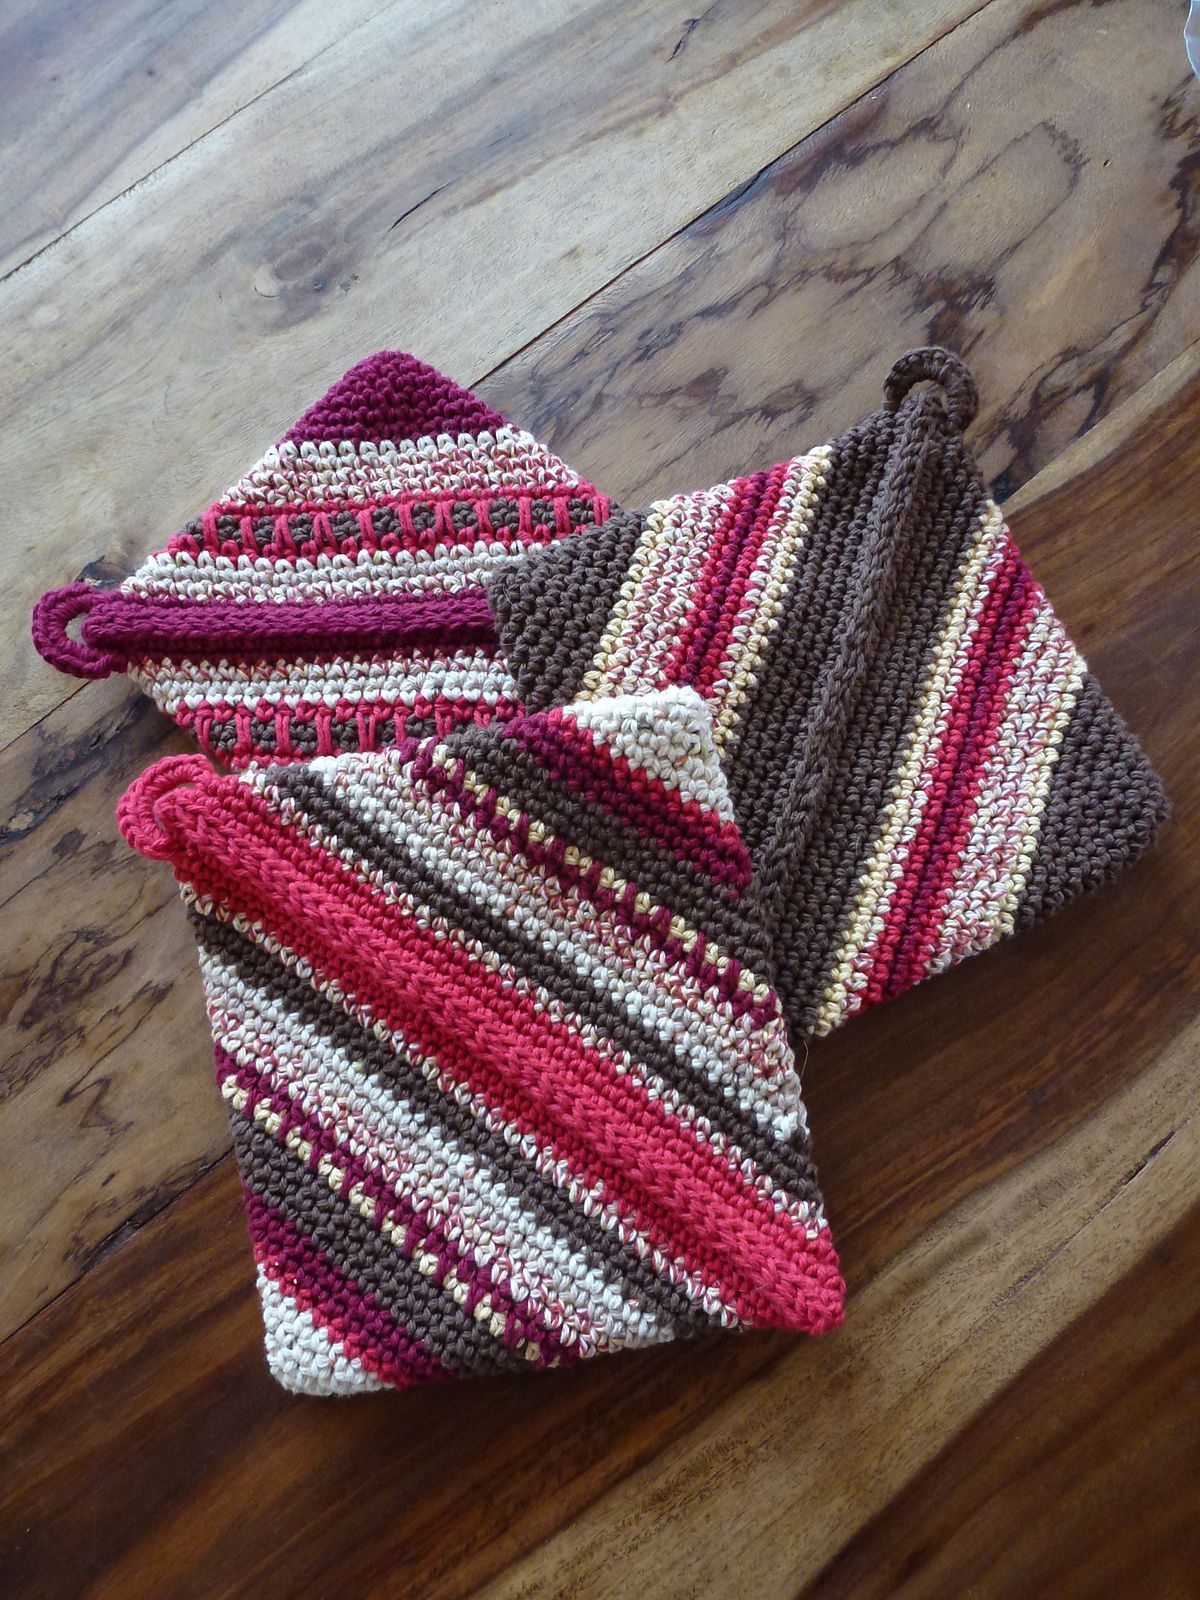 Thick Crochet Potholder Pattern Double Thick Diagonally Crocheted Potholder Pattern Andrea Mielke